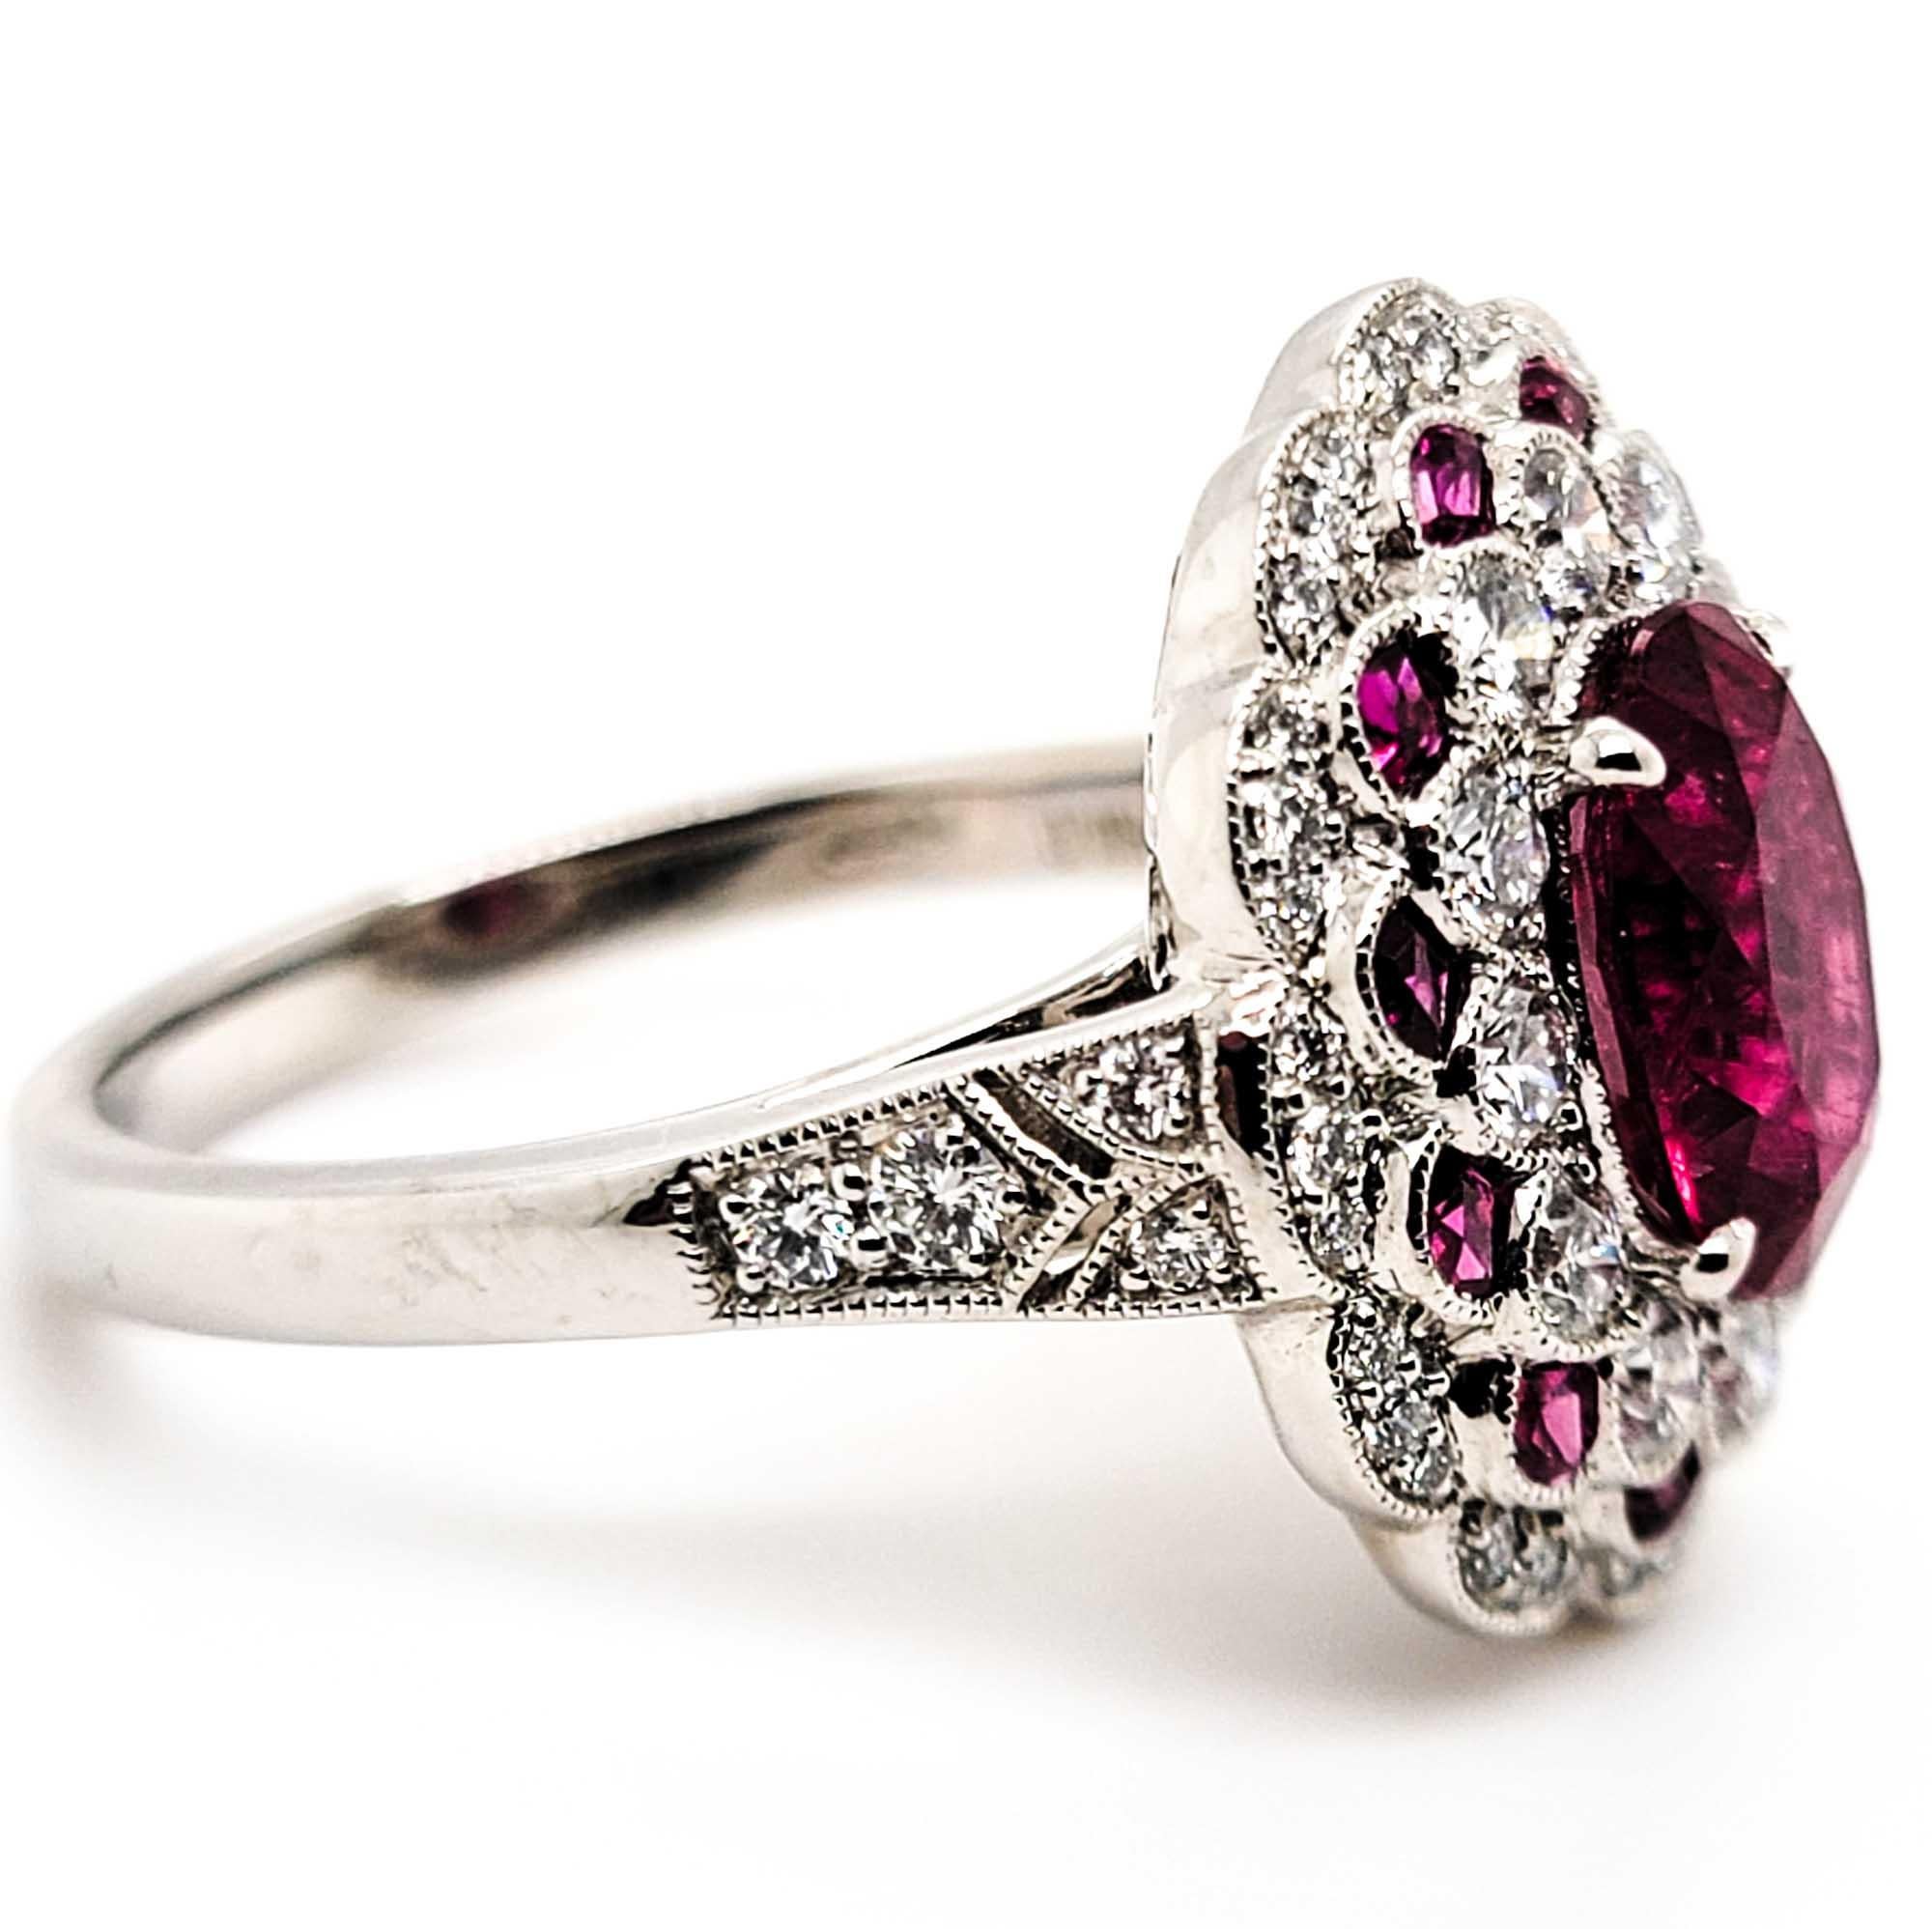 Art deco inspired oval cut shape ruby center ring set in platinum with the total weight of the center ruby 1.88 carats surrounded by stunning small rubies weighing 0.35 carat along with diamonds weighing a total of 0.68 carats.

Sophia D by Joseph